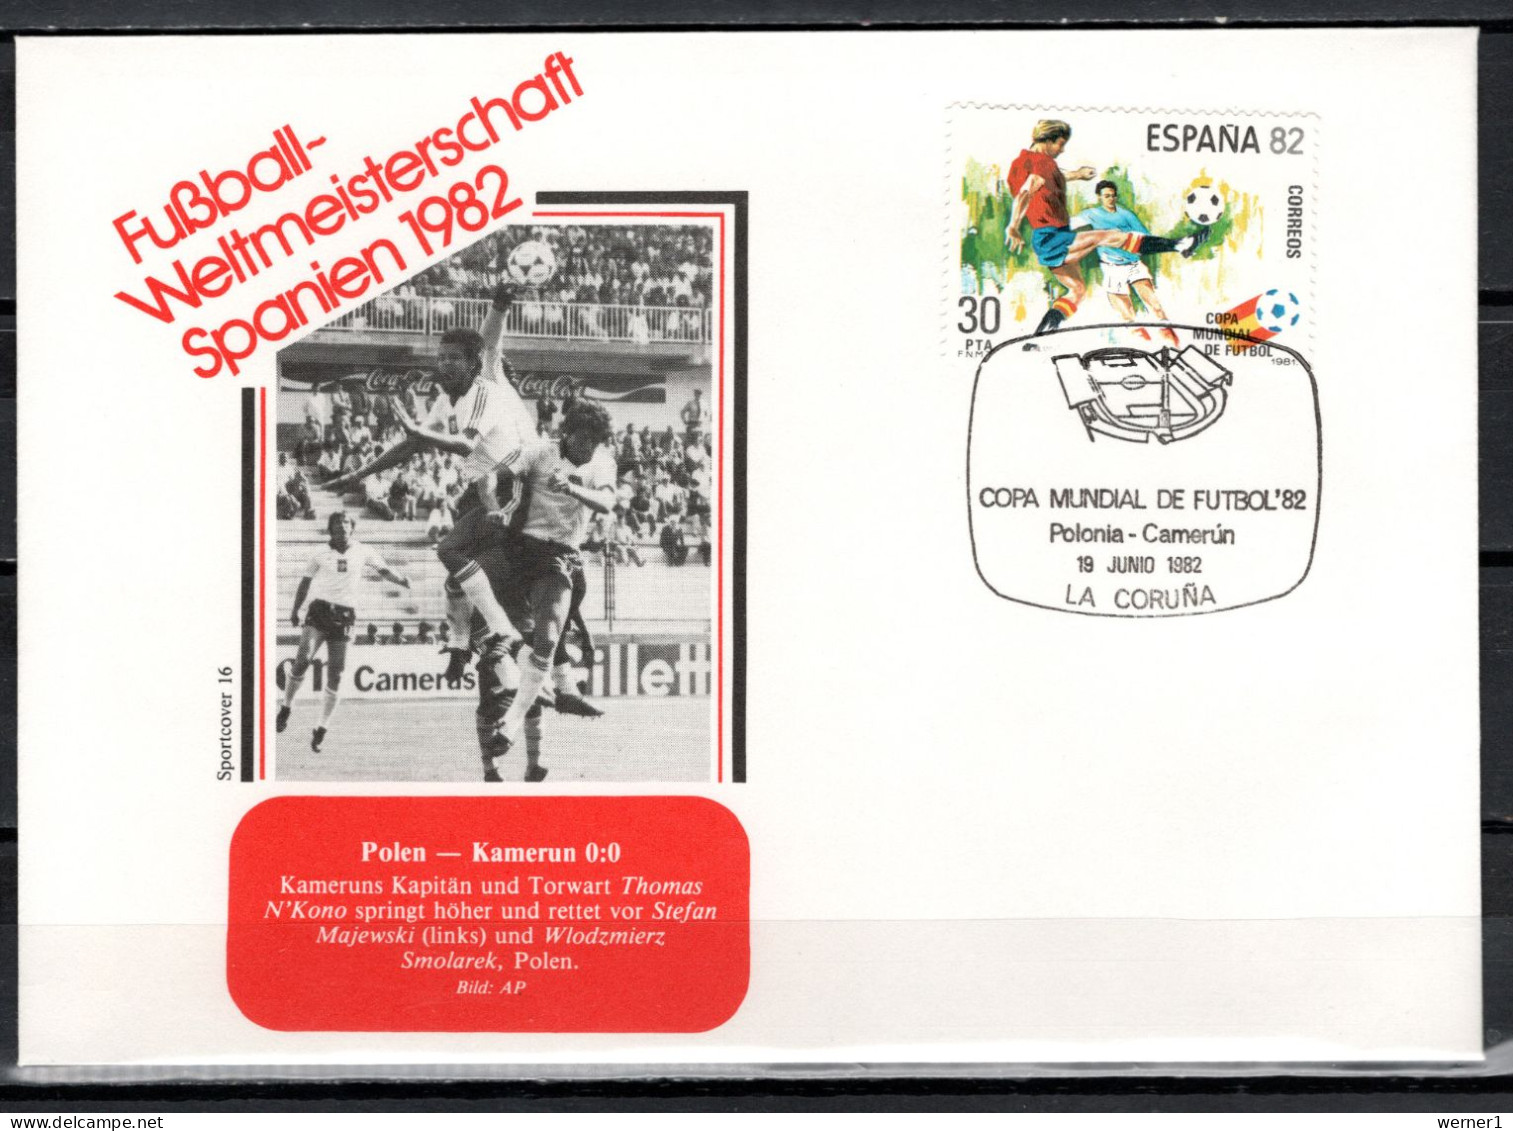 Spain 1982 Football Soccer World Cup Commemorative Cover Match Poland - Cameroon 0:0 - 1982 – Spain